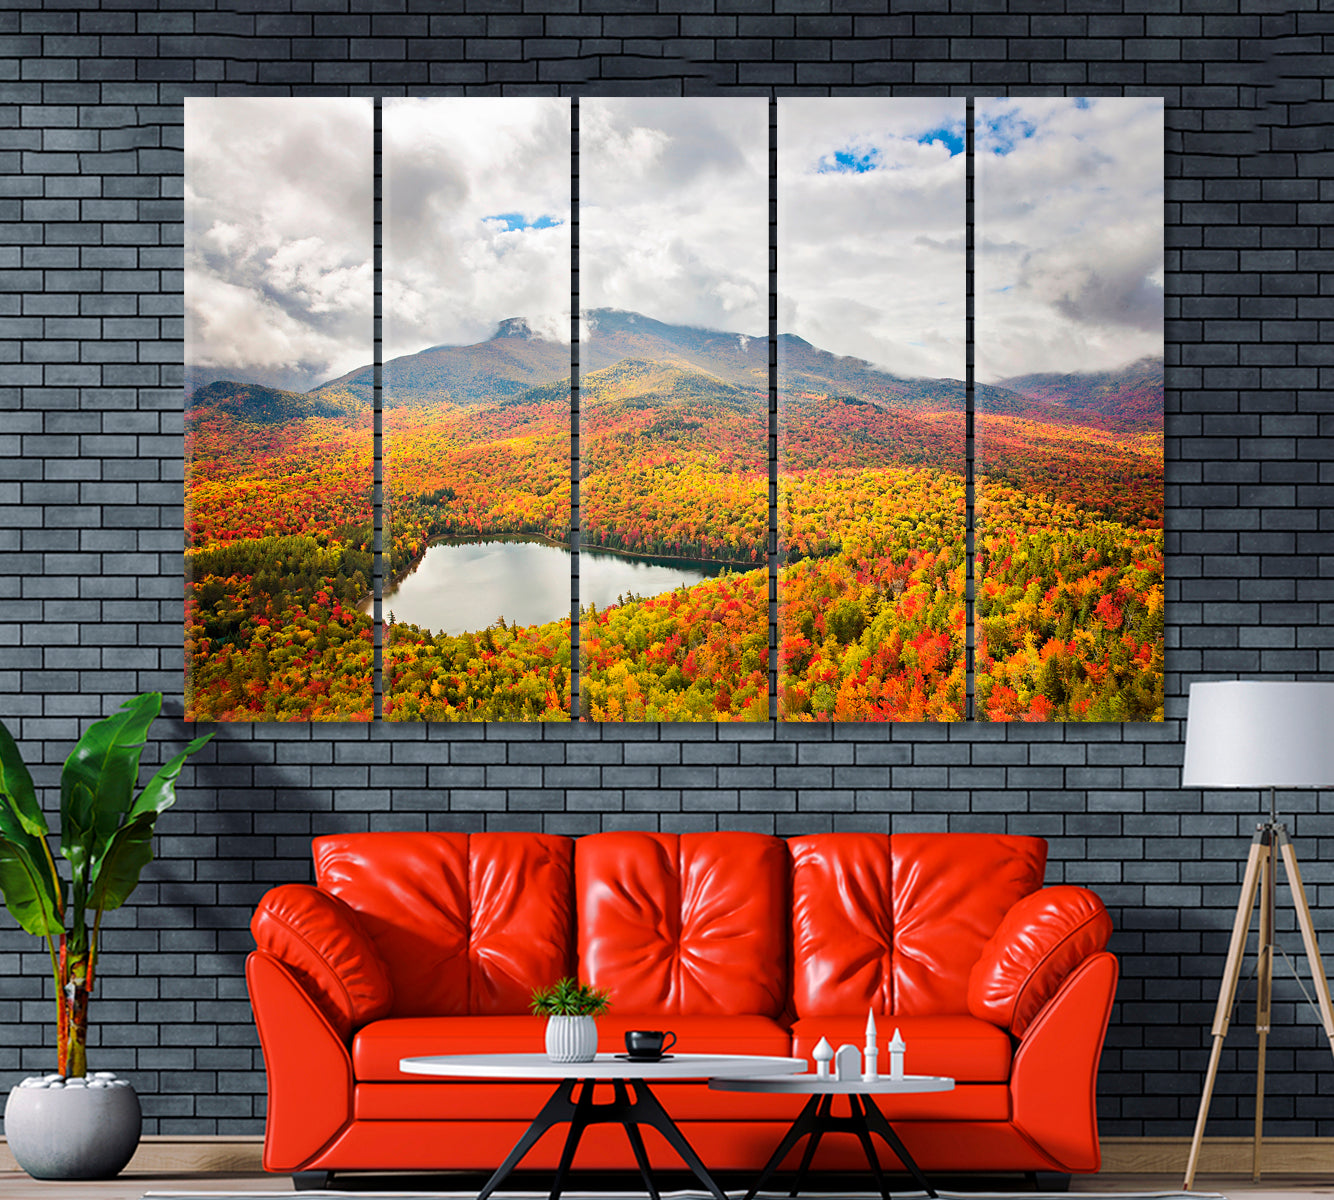 Autumn in New England Canvas Print ArtLexy 5 Panels 36"x24" inches 